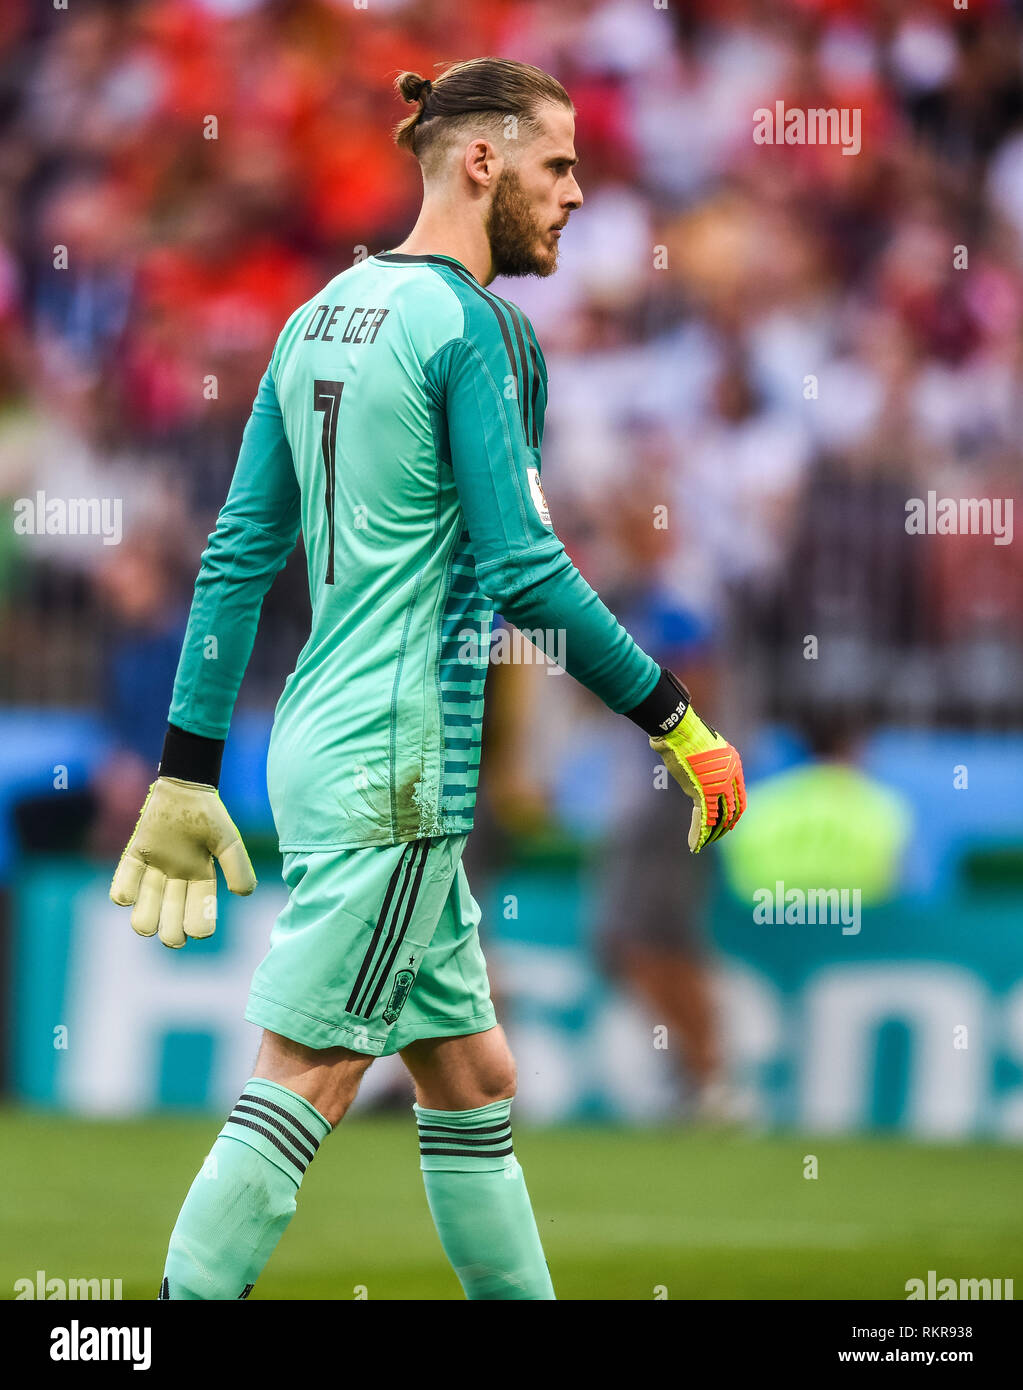 Moscow, Russia - July 1, 2018. Spain national football team goalkeeper David De Gea during FIFA World Cup 2018 Round of 16 match Spain vs Russia. Stock Photo